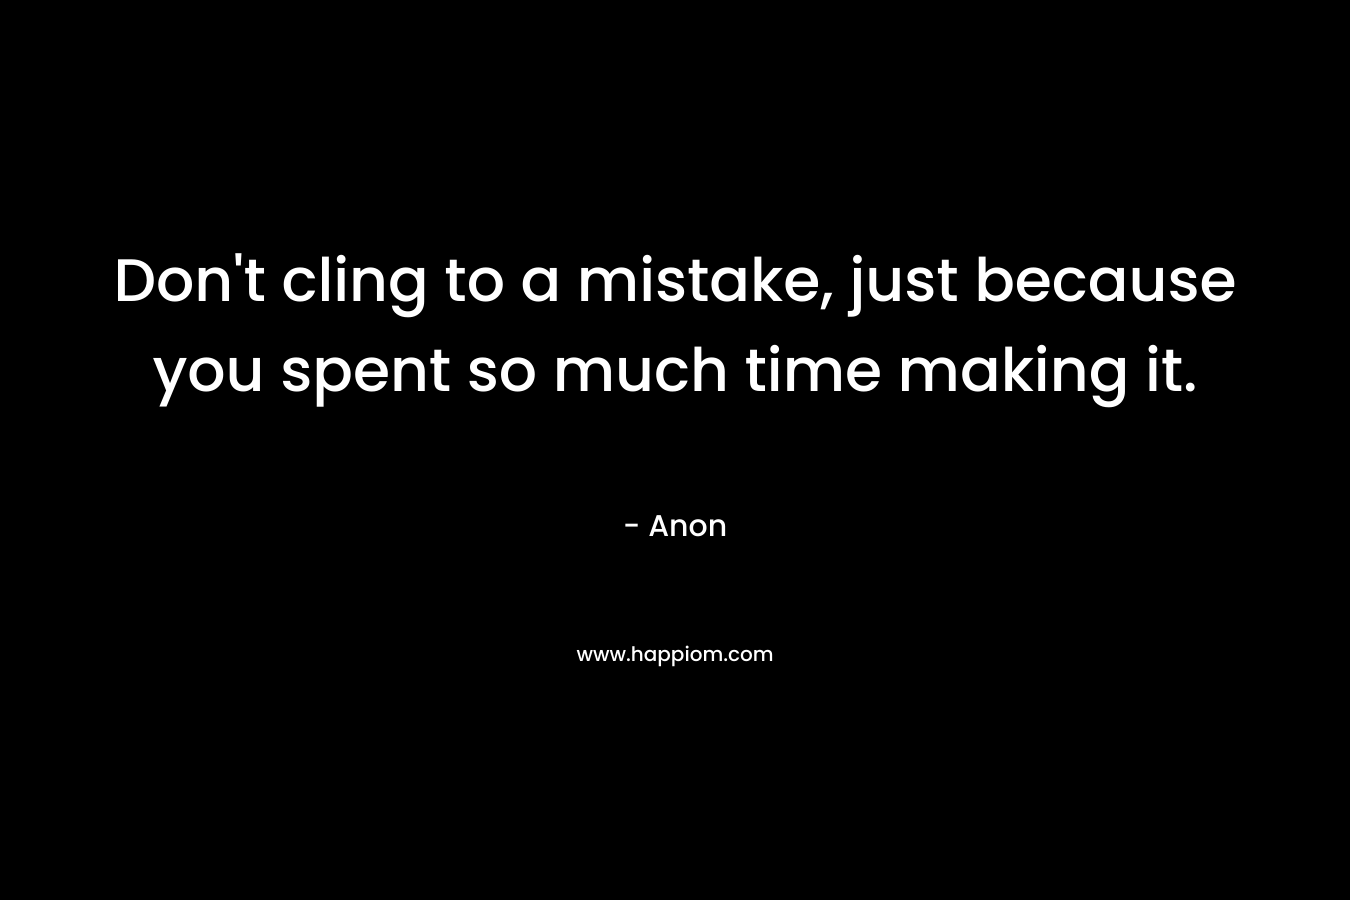 Don’t cling to a mistake, just because you spent so much time making it. – Anon